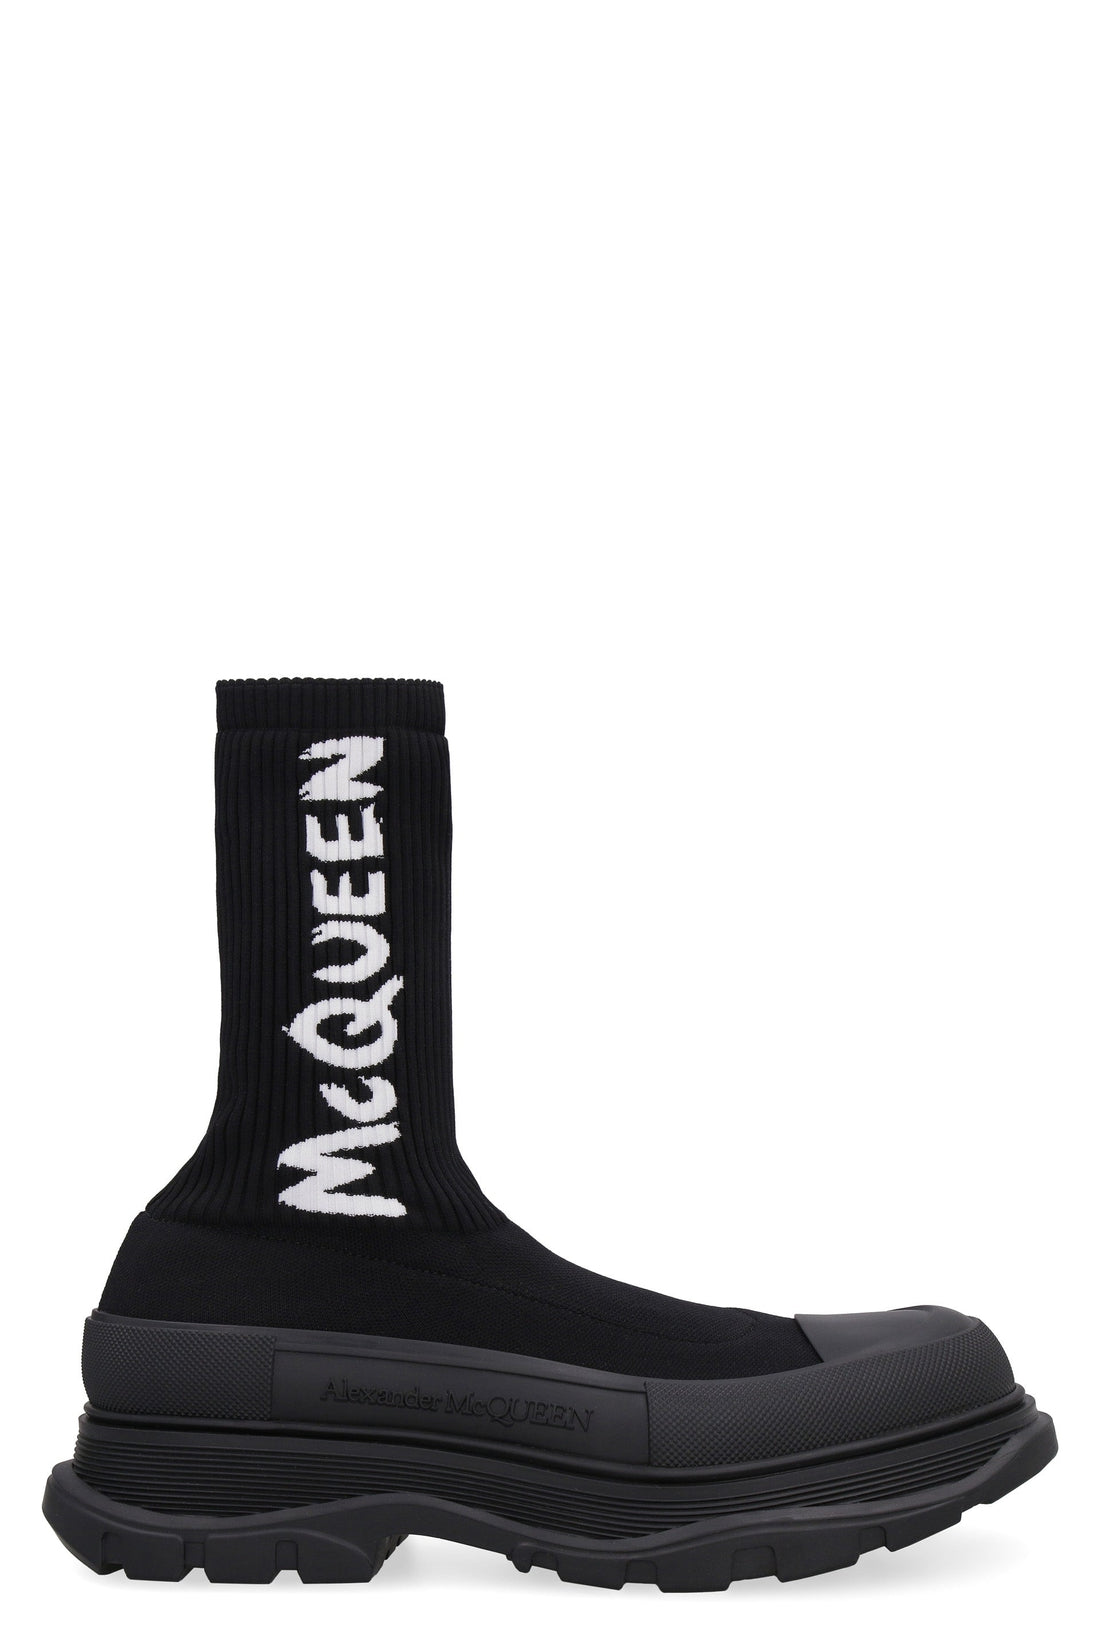 Alexander McQueen-OUTLET-SALE-Tread Slick knitted ankle boots-ARCHIVIST